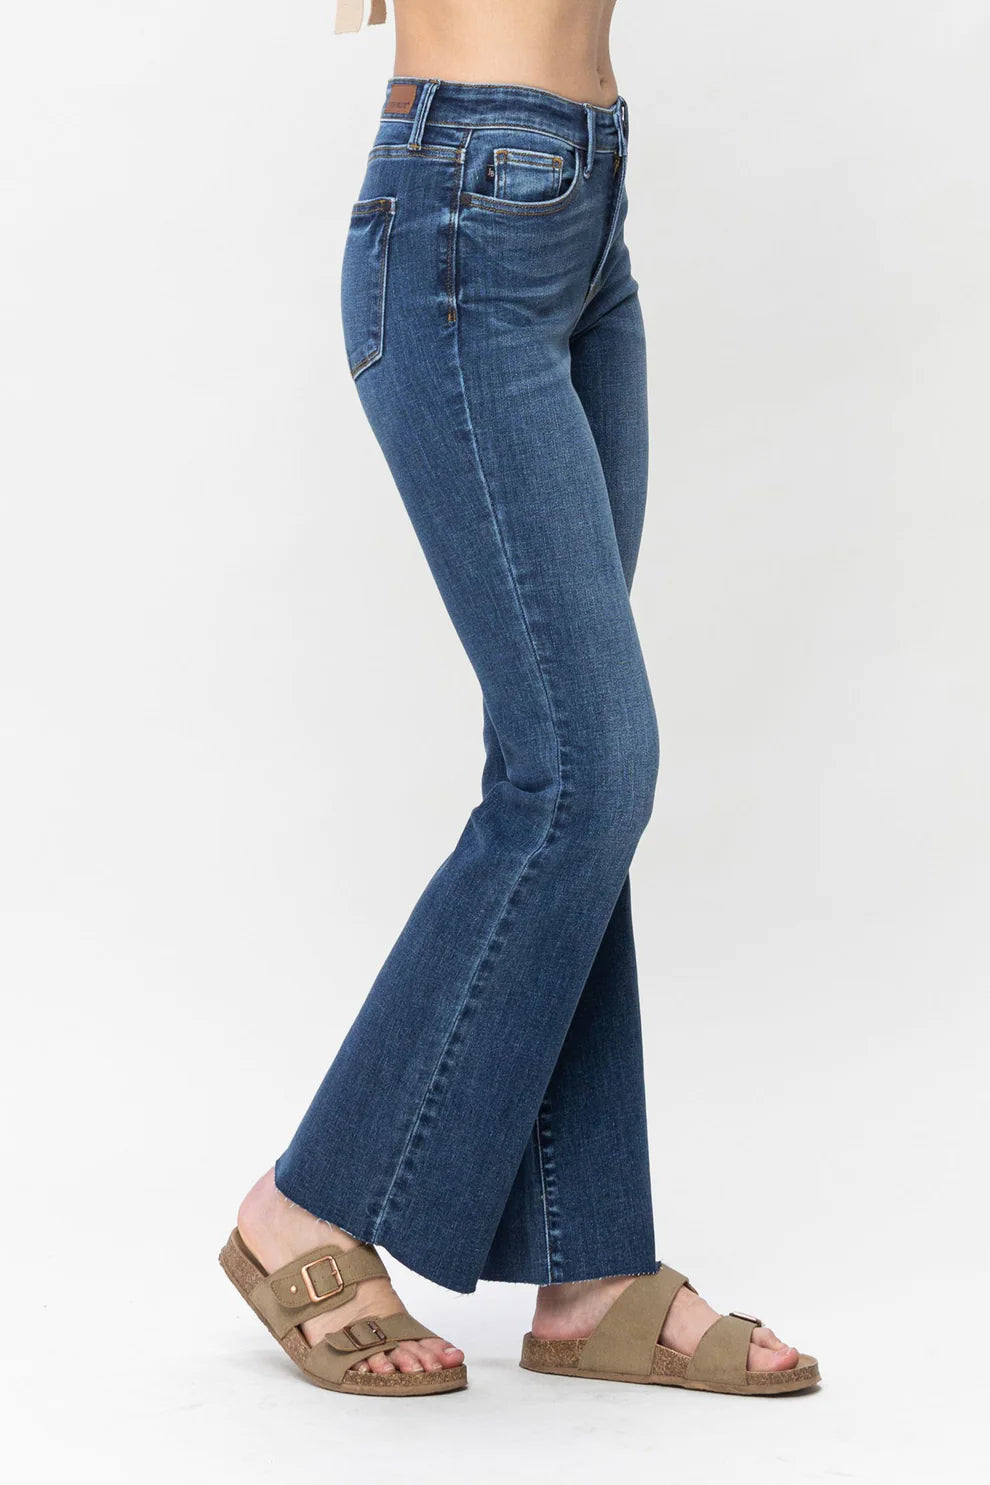 Judy Blue Contrast Mid Rise Bootcut